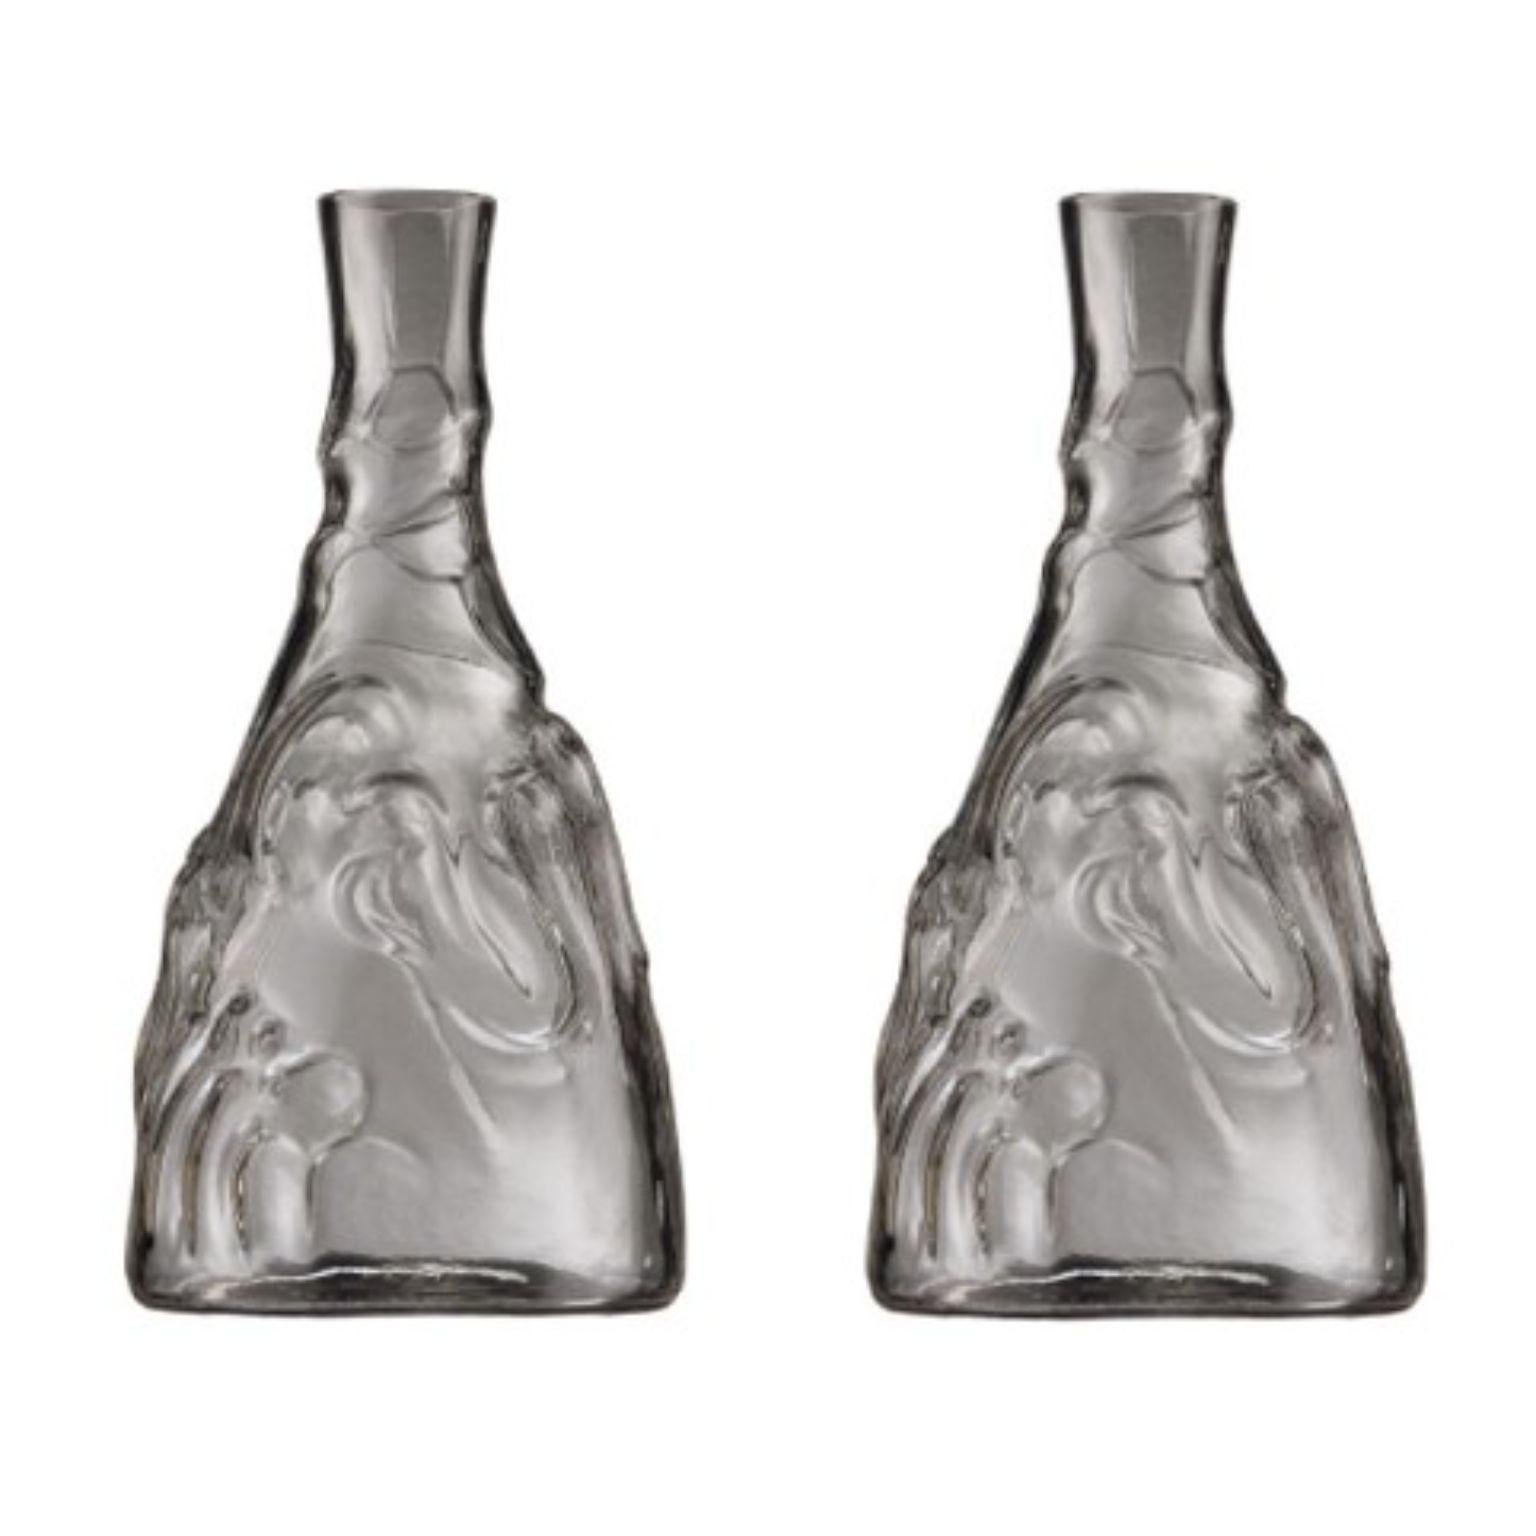 Set of 2 Casa de Familia Bottles by Josep Maria Jujol
Dimensions: diameter 13 x height 27 cm 
Materials: glass. 
Also available in blue glass. 


He designed the Casa de Familia Bottle in 1912, and more than a century later it’s still going